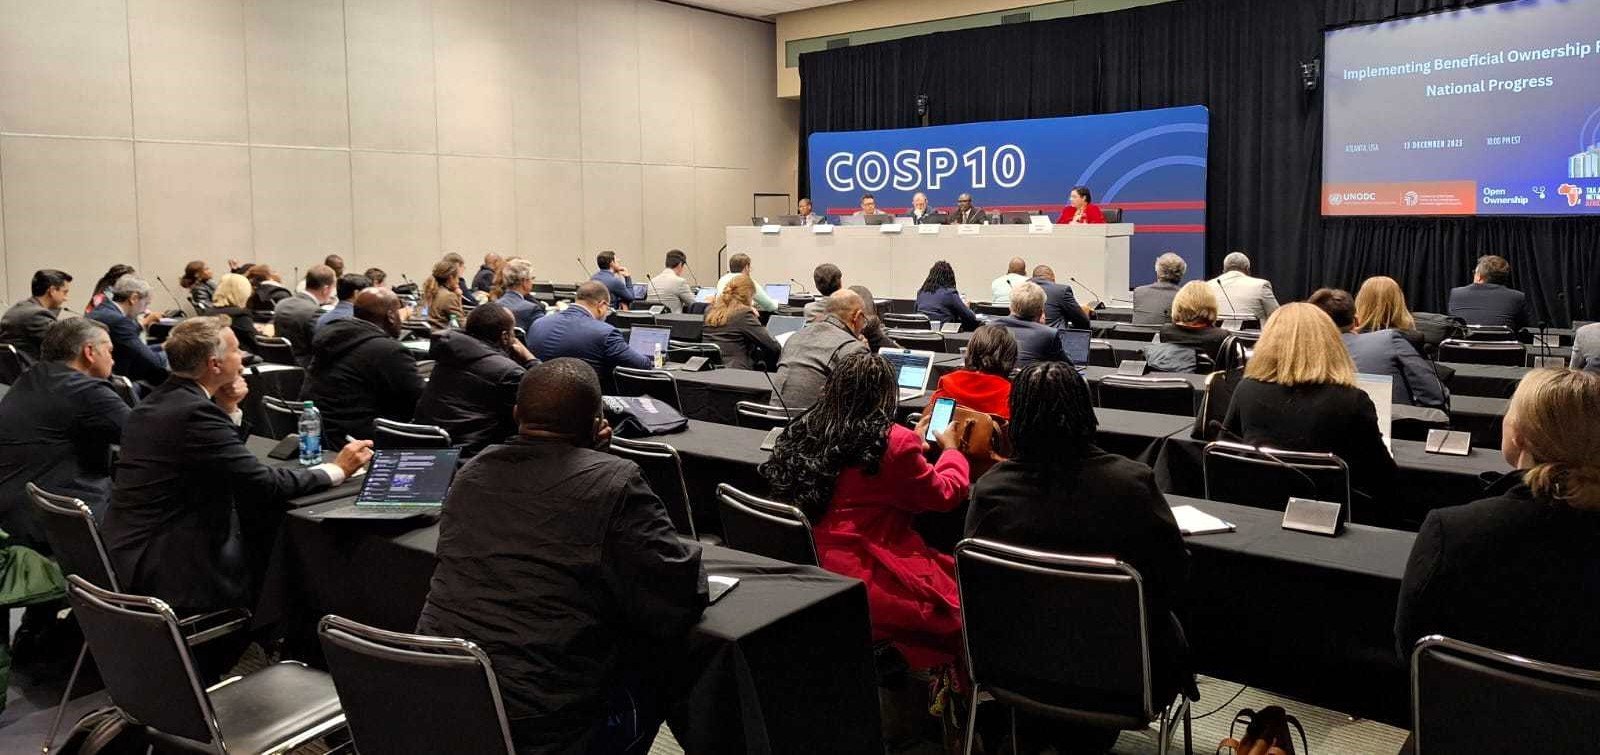 Open Ownership’s special event at CoSP10